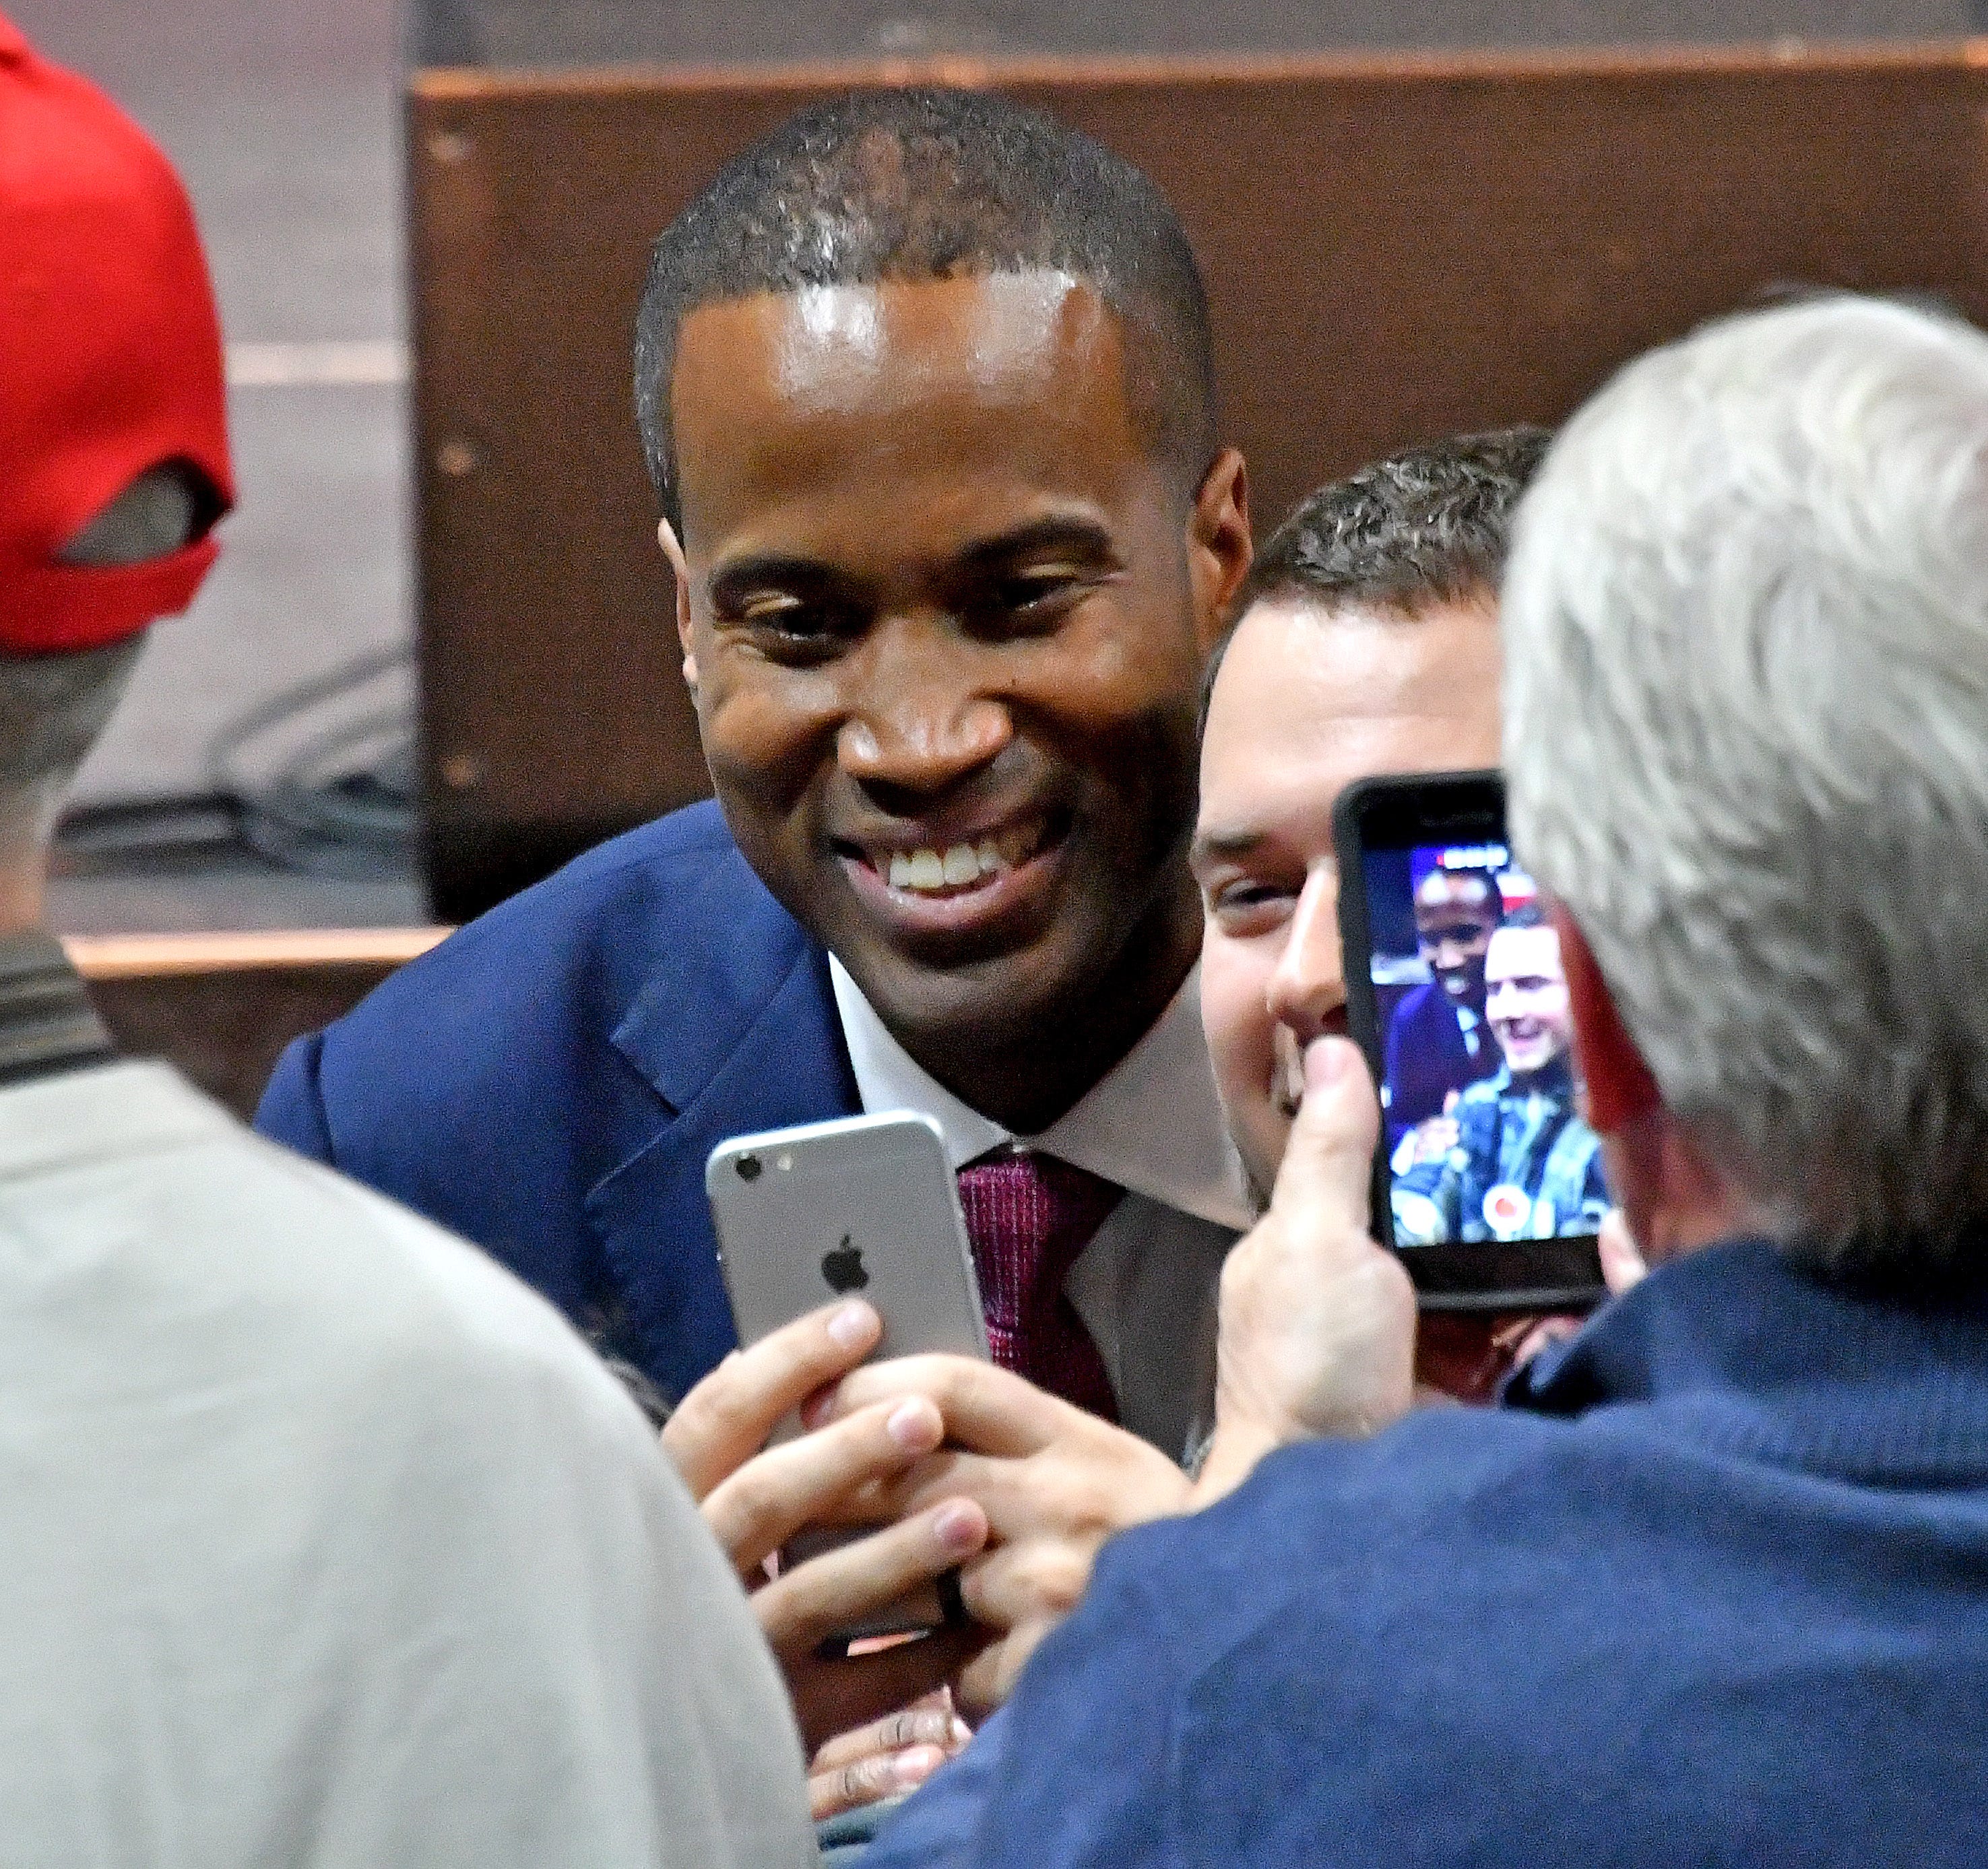 John James poses for a selfie with a supporter.